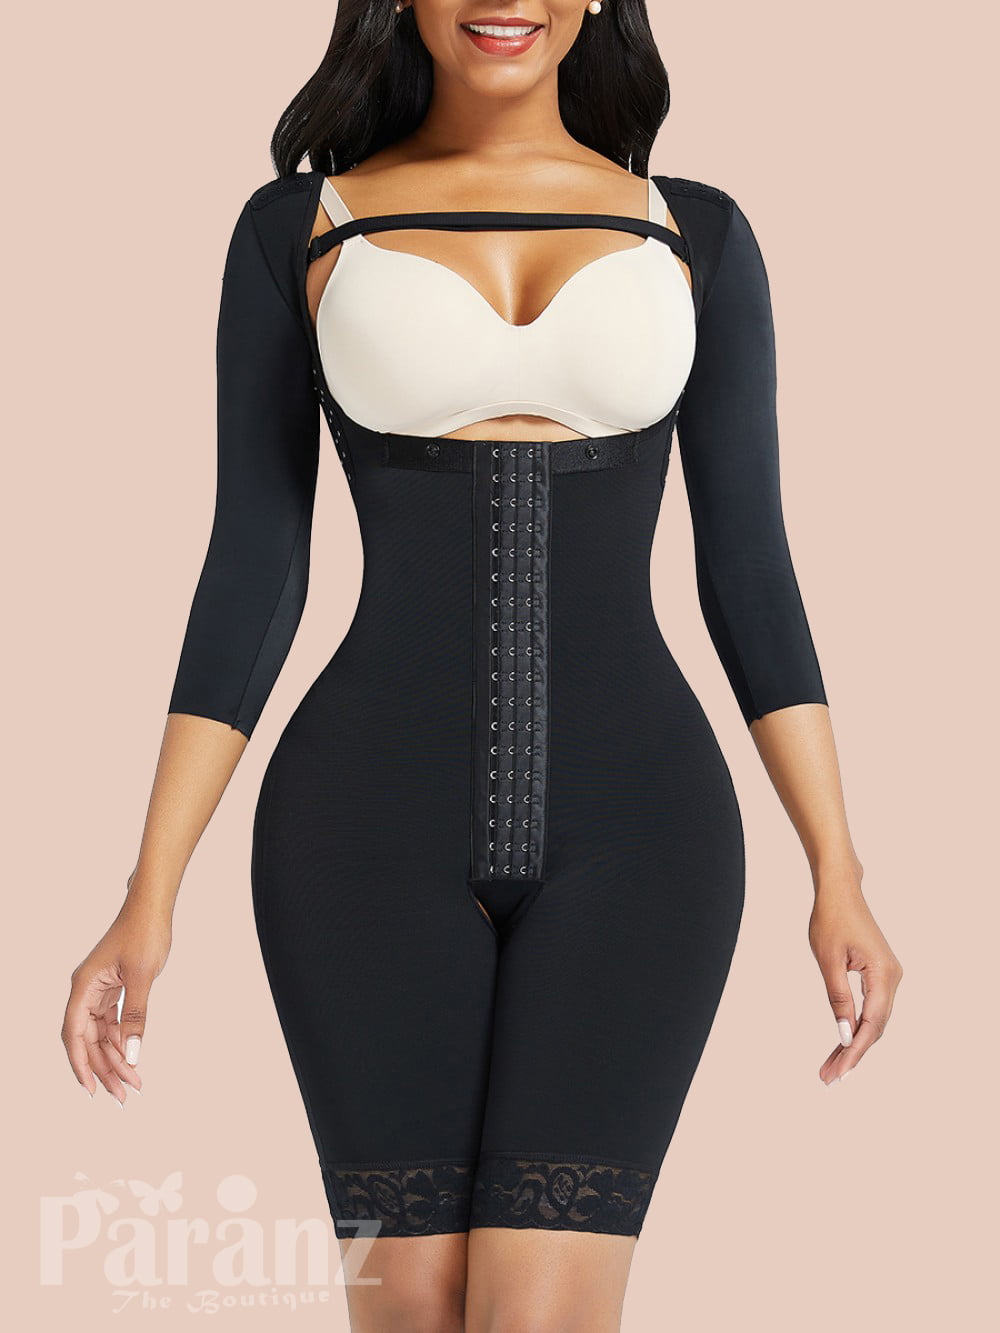 https://paranz.com/wp-content/uploads/2021/08/Black-Lace-Trim-Hourglass-Body-Shaper-With-Sleeves-Curve-Shaper-view.jpg